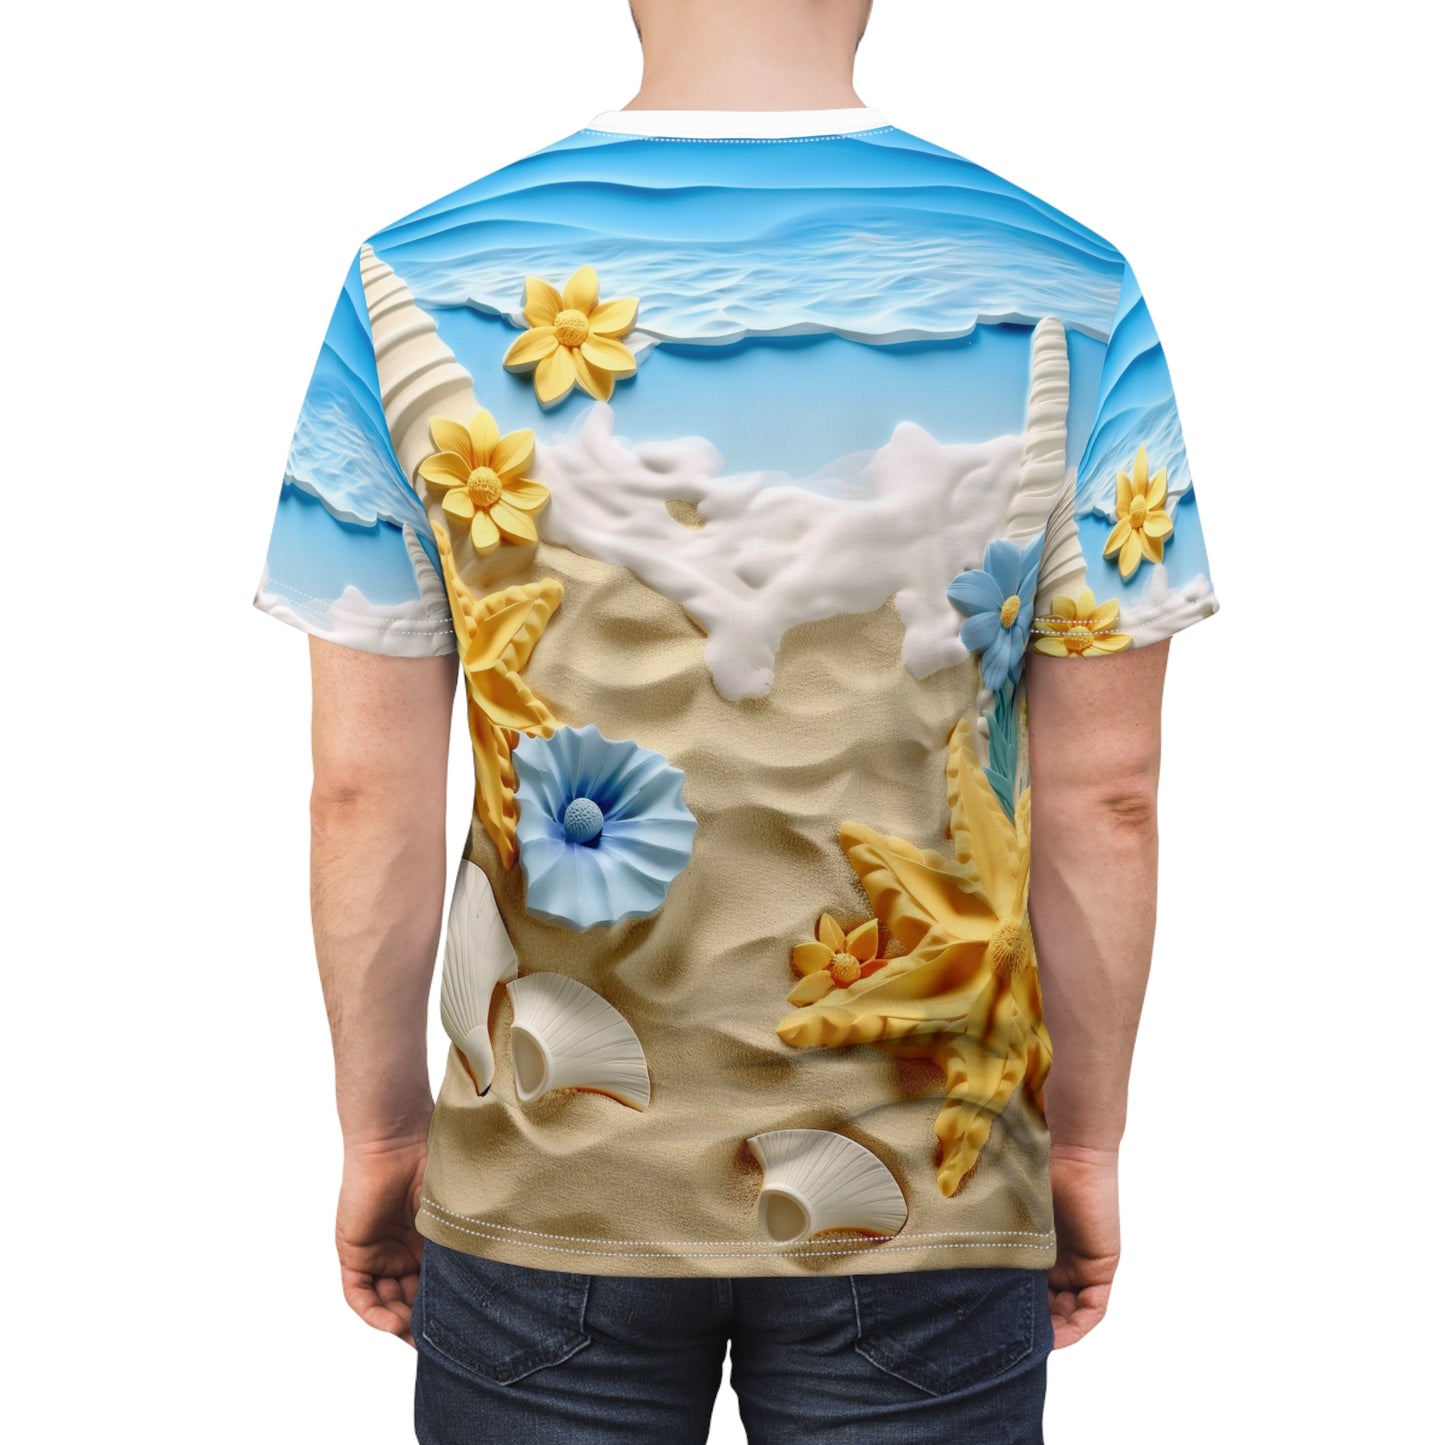 3D Beach Style, Abstract Style, Ocean Design, Sand and Waves, Unisex Cut & Sew Tee